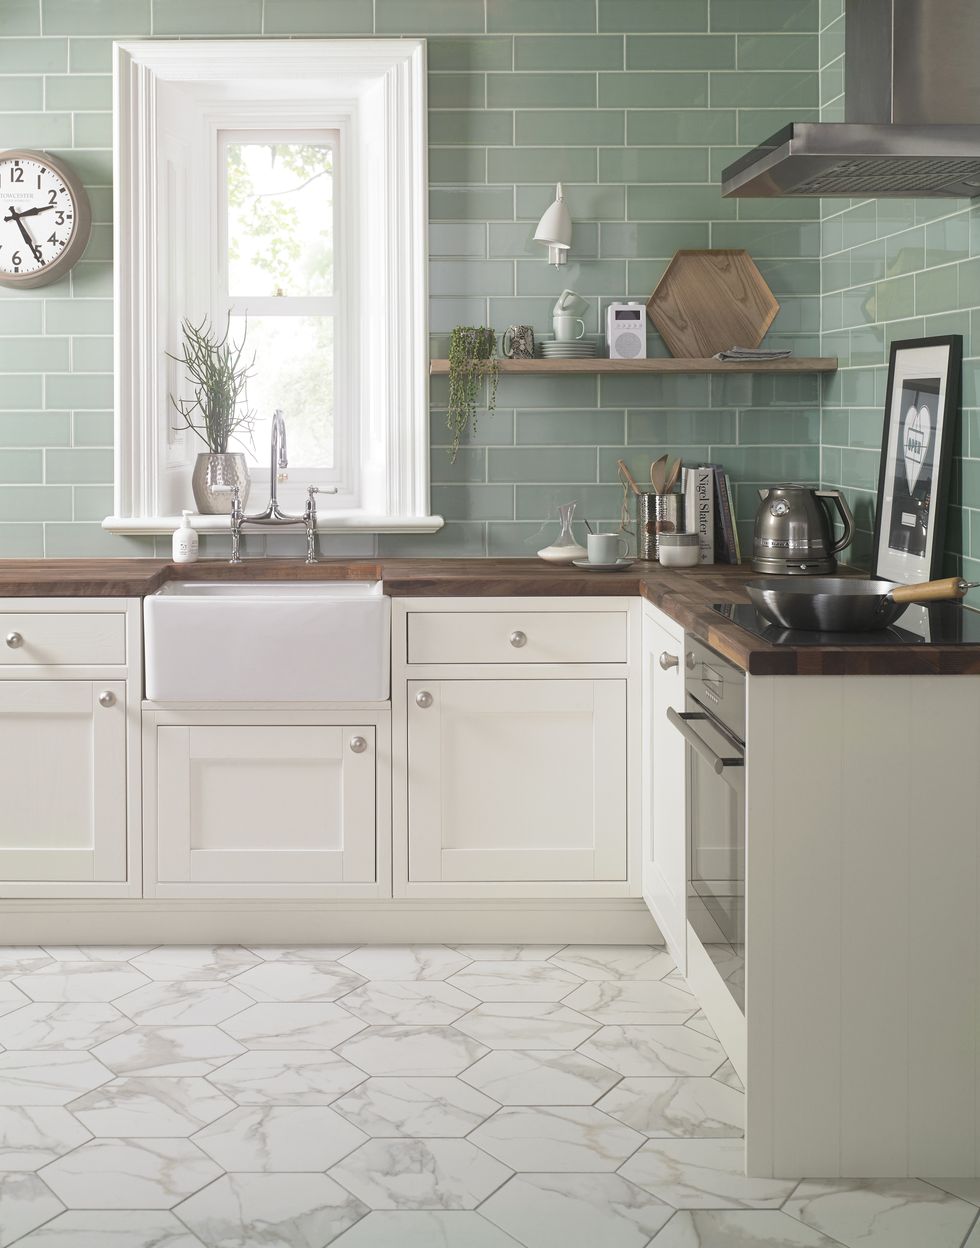 Pistachio Aquarelle Tiles - Kitchen - These ceramic brick shaped Pistachio Aquarelle Tiles have a green hue and a gloss finish and a smooth shadow glaze around the edge of the tile which gives a subtle bevelled illusion.